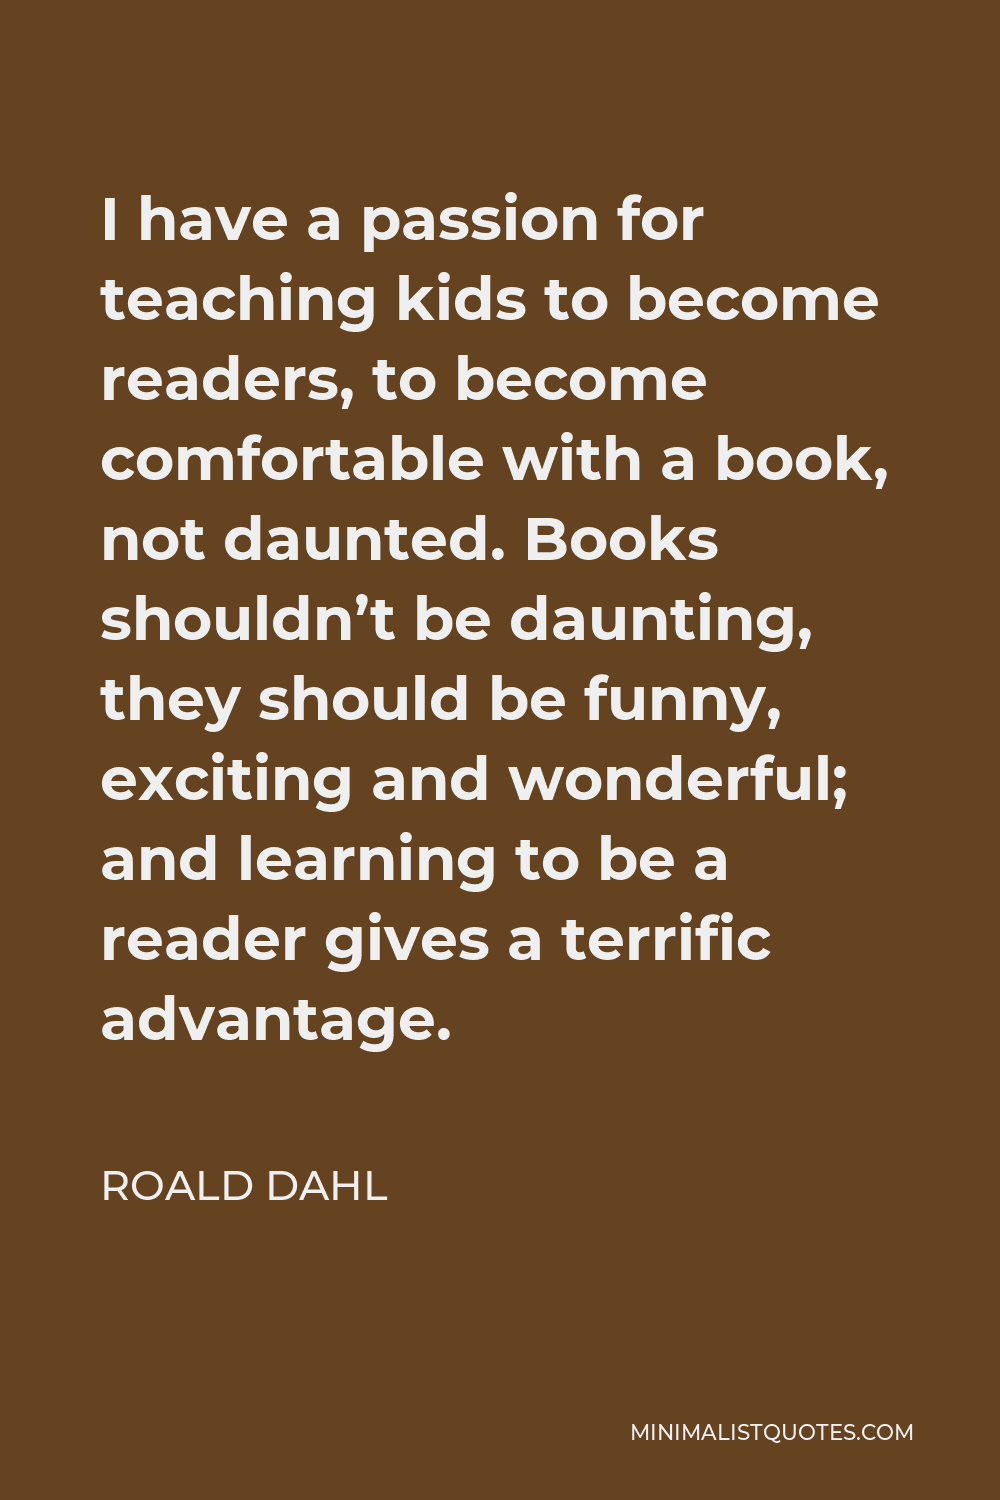 Roald Dahl Quote: I have a passion for teaching kids to become readers, to  become comfortable with a book, not daunted. Books shouldn't be daunting,  they should be funny, exciting and wonderful;